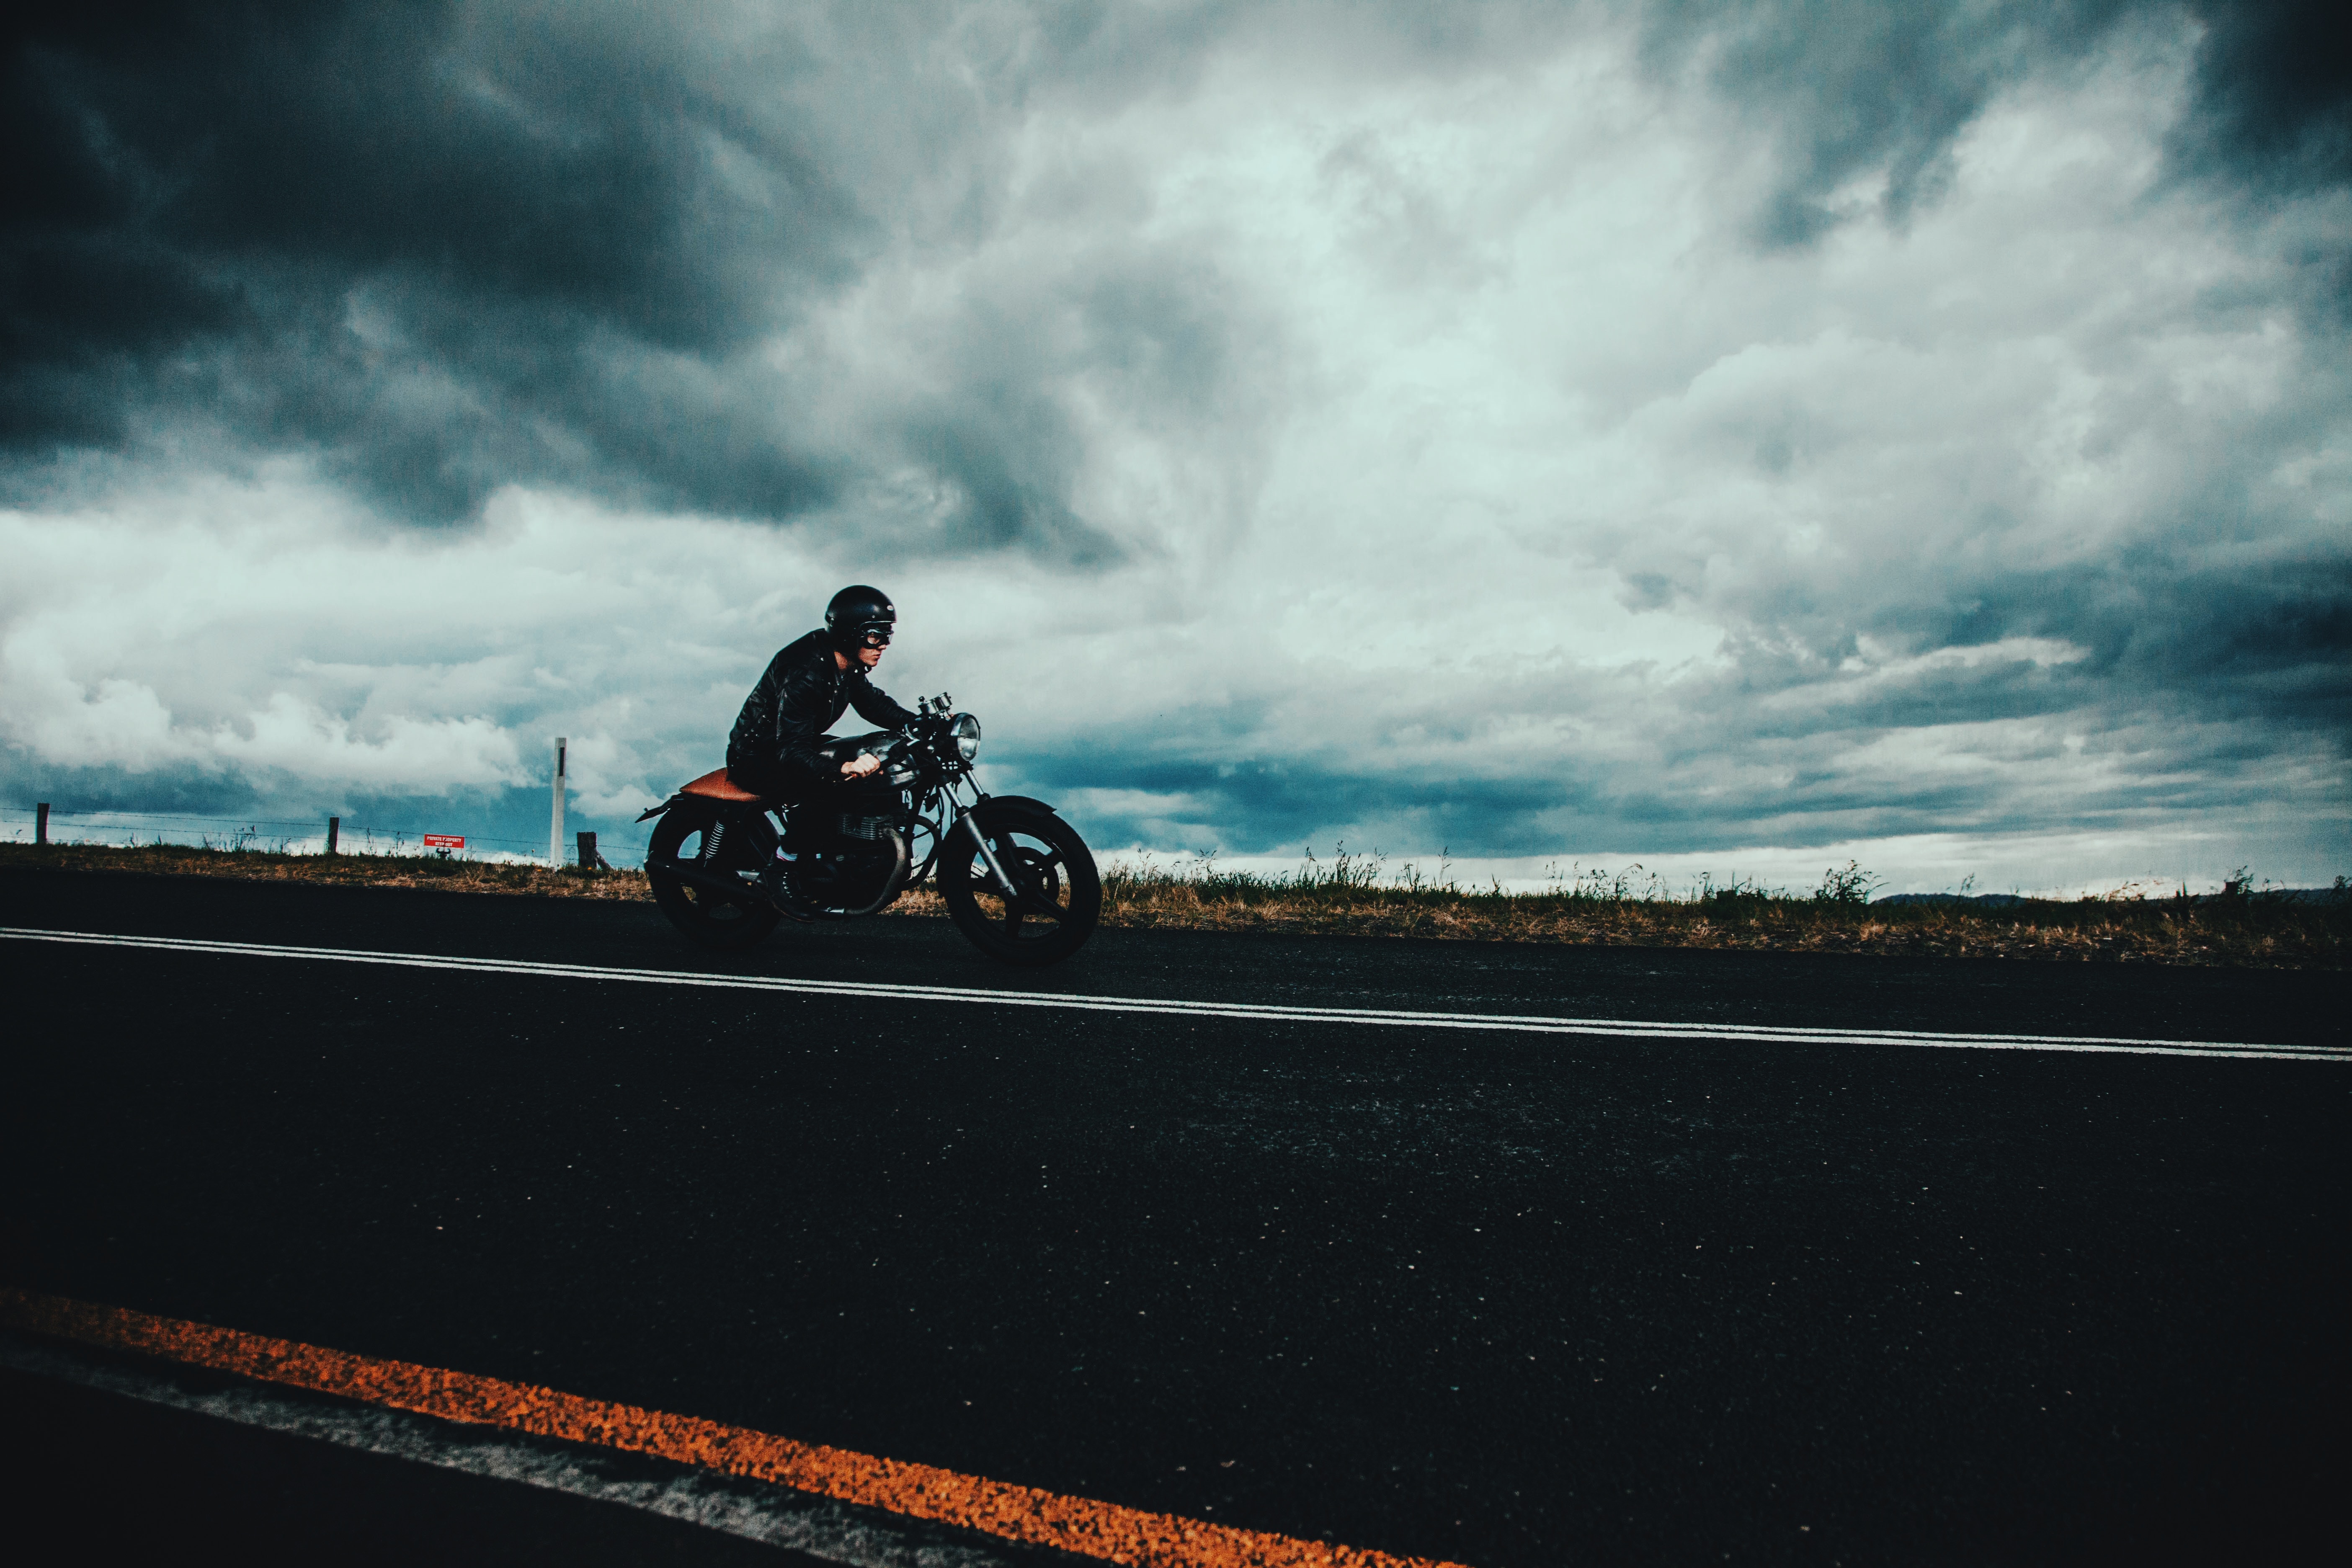 motorcyclist, overcast, motorcycles, road, mainly cloudy, markup, helmet, asphalt, clouds lock screen backgrounds